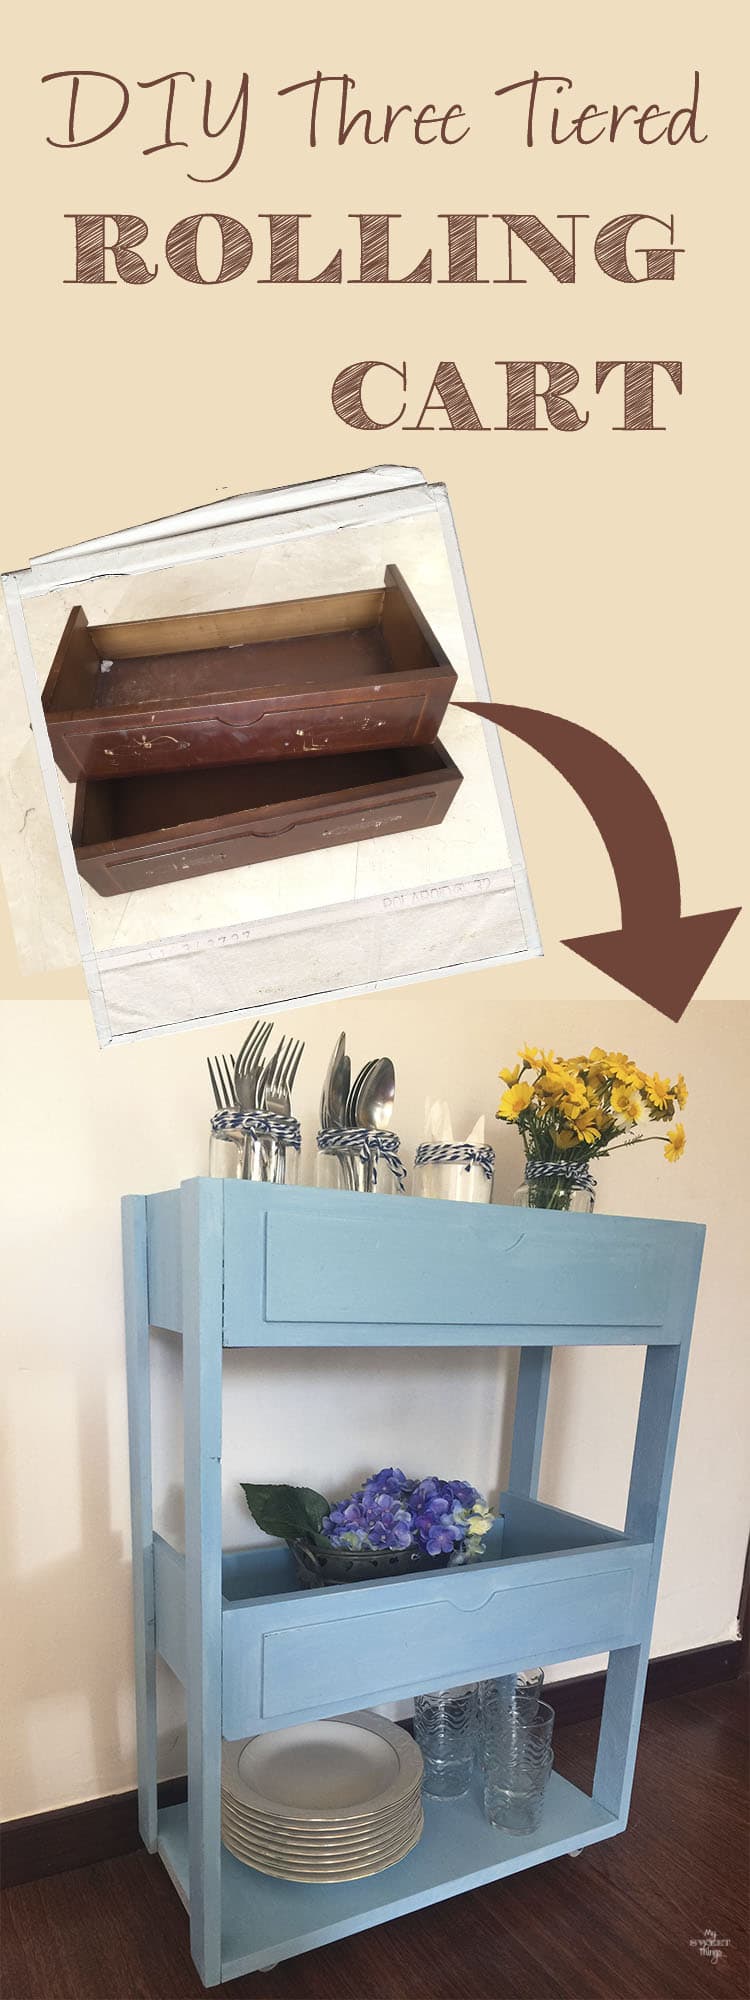 DIY Three tiered rolling cart out of free drawers · My Sweet Things